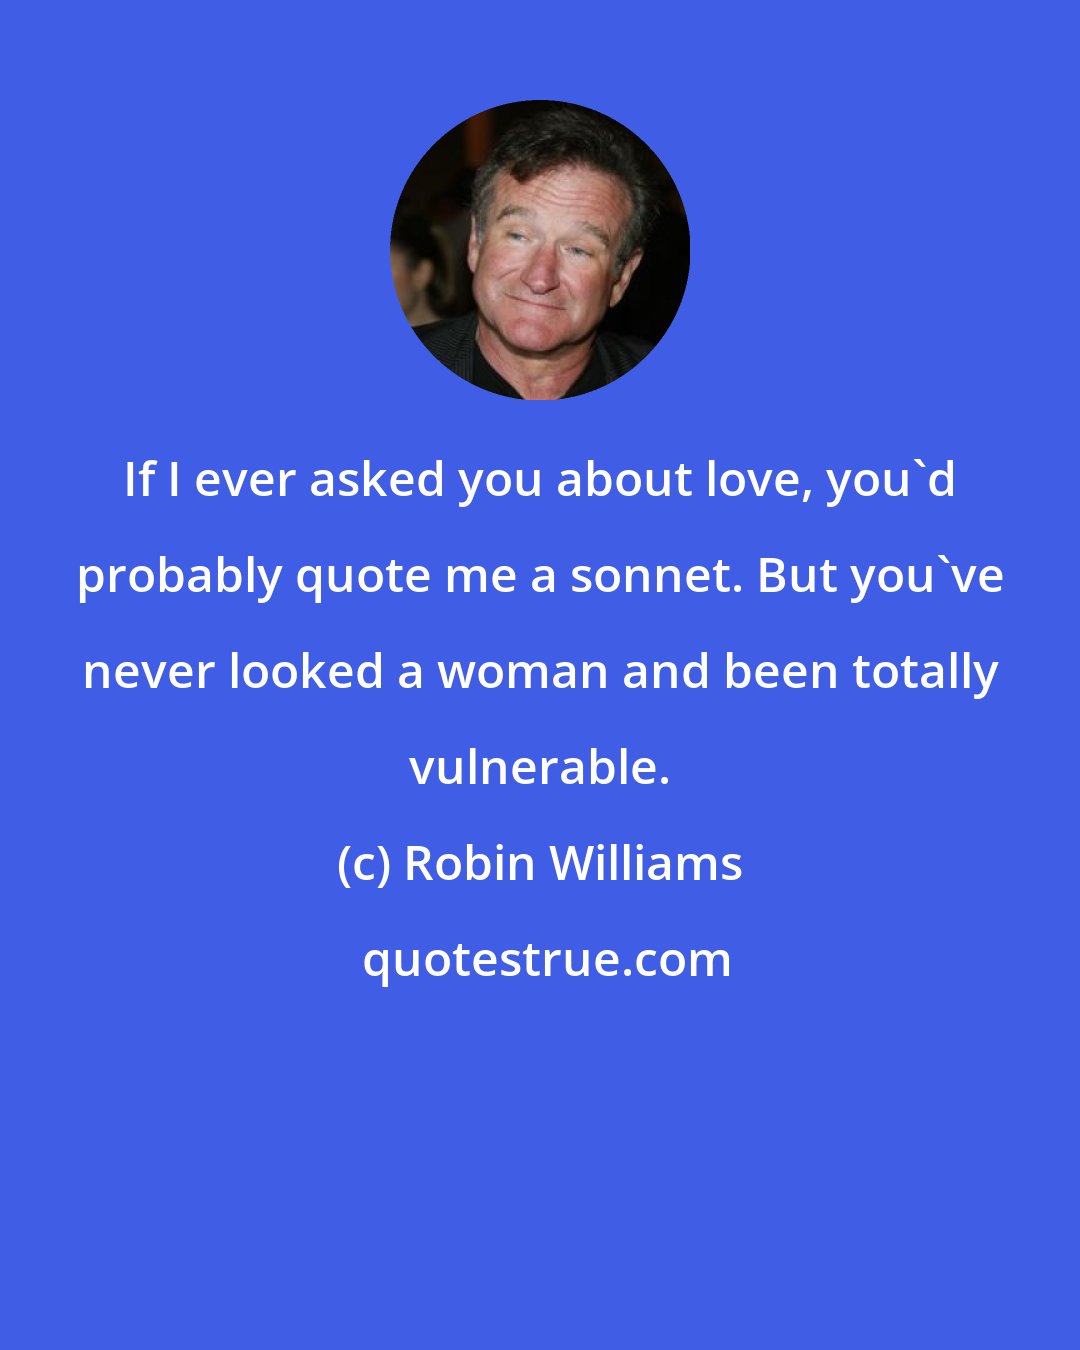 Robin Williams: If I ever asked you about love, you'd probably quote me a sonnet. But you've never looked a woman and been totally vulnerable.